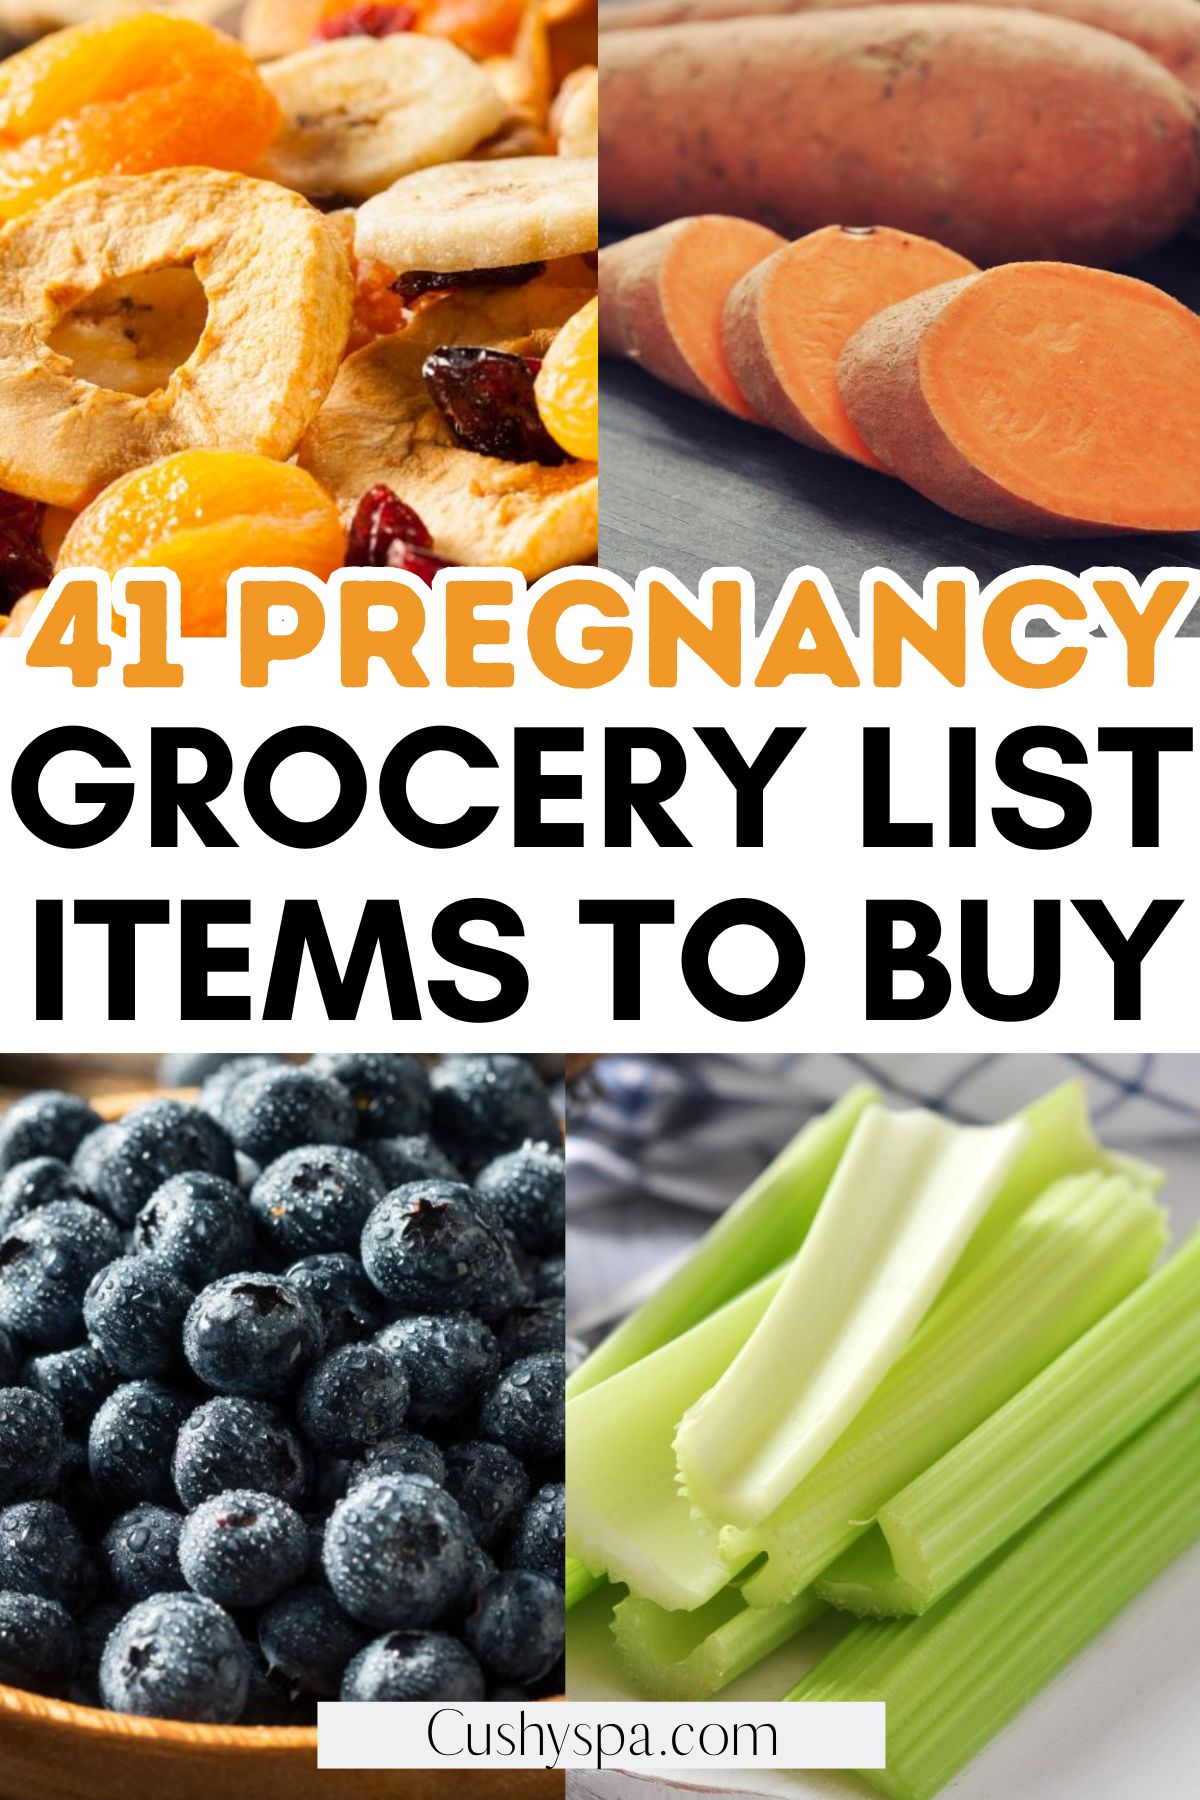 Pregnancy Grocery List items to buy